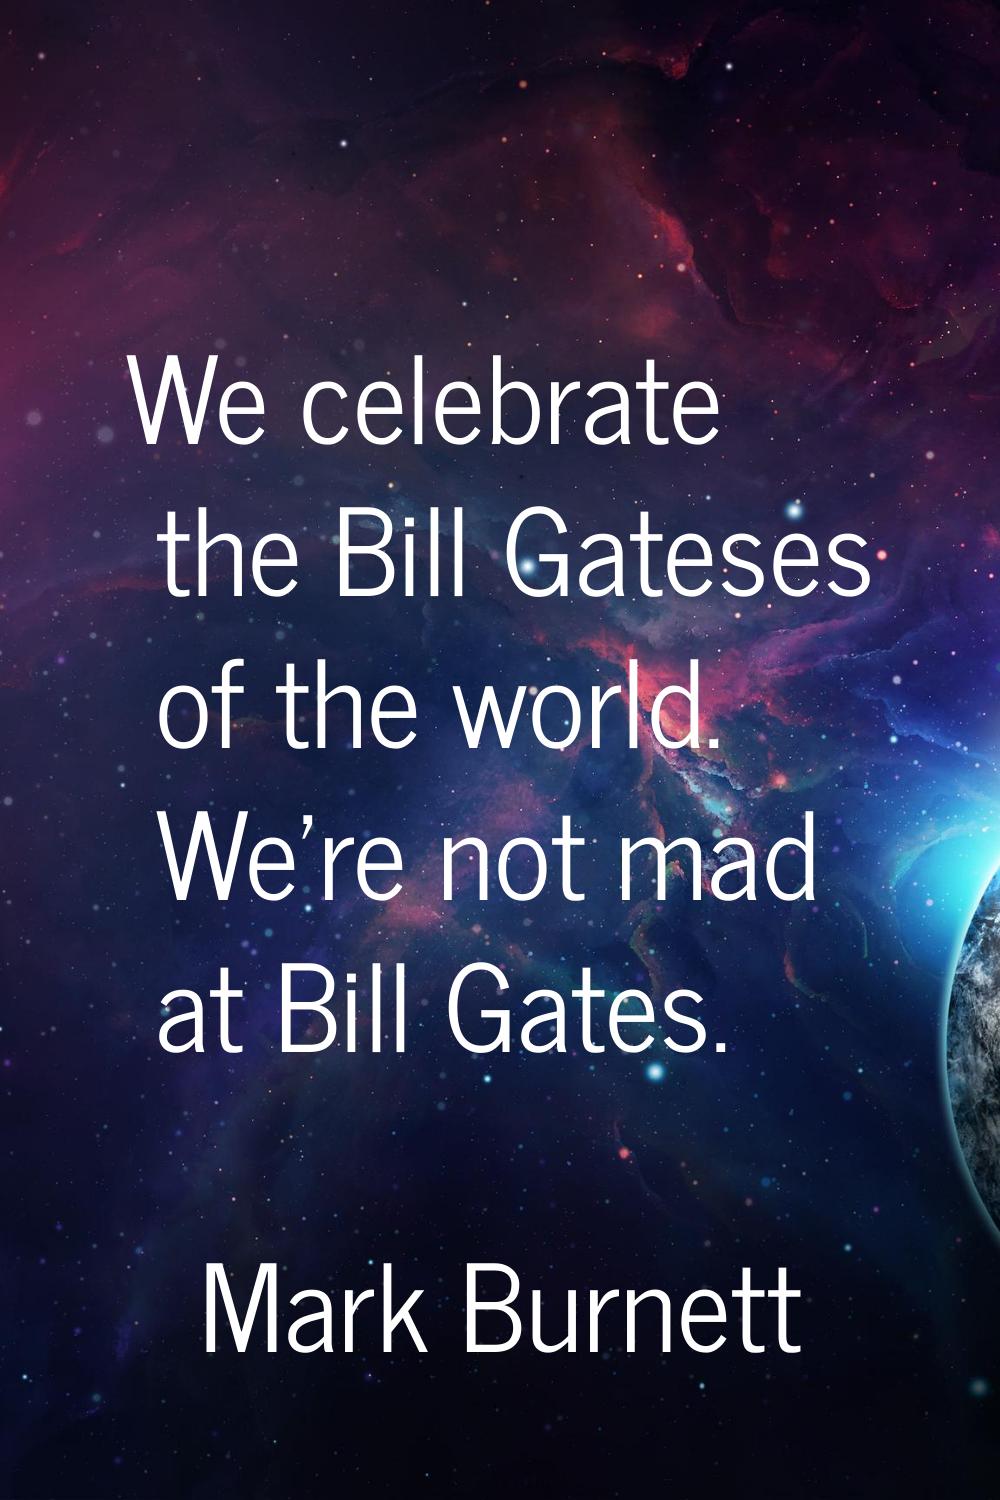 We celebrate the Bill Gateses of the world. We're not mad at Bill Gates.